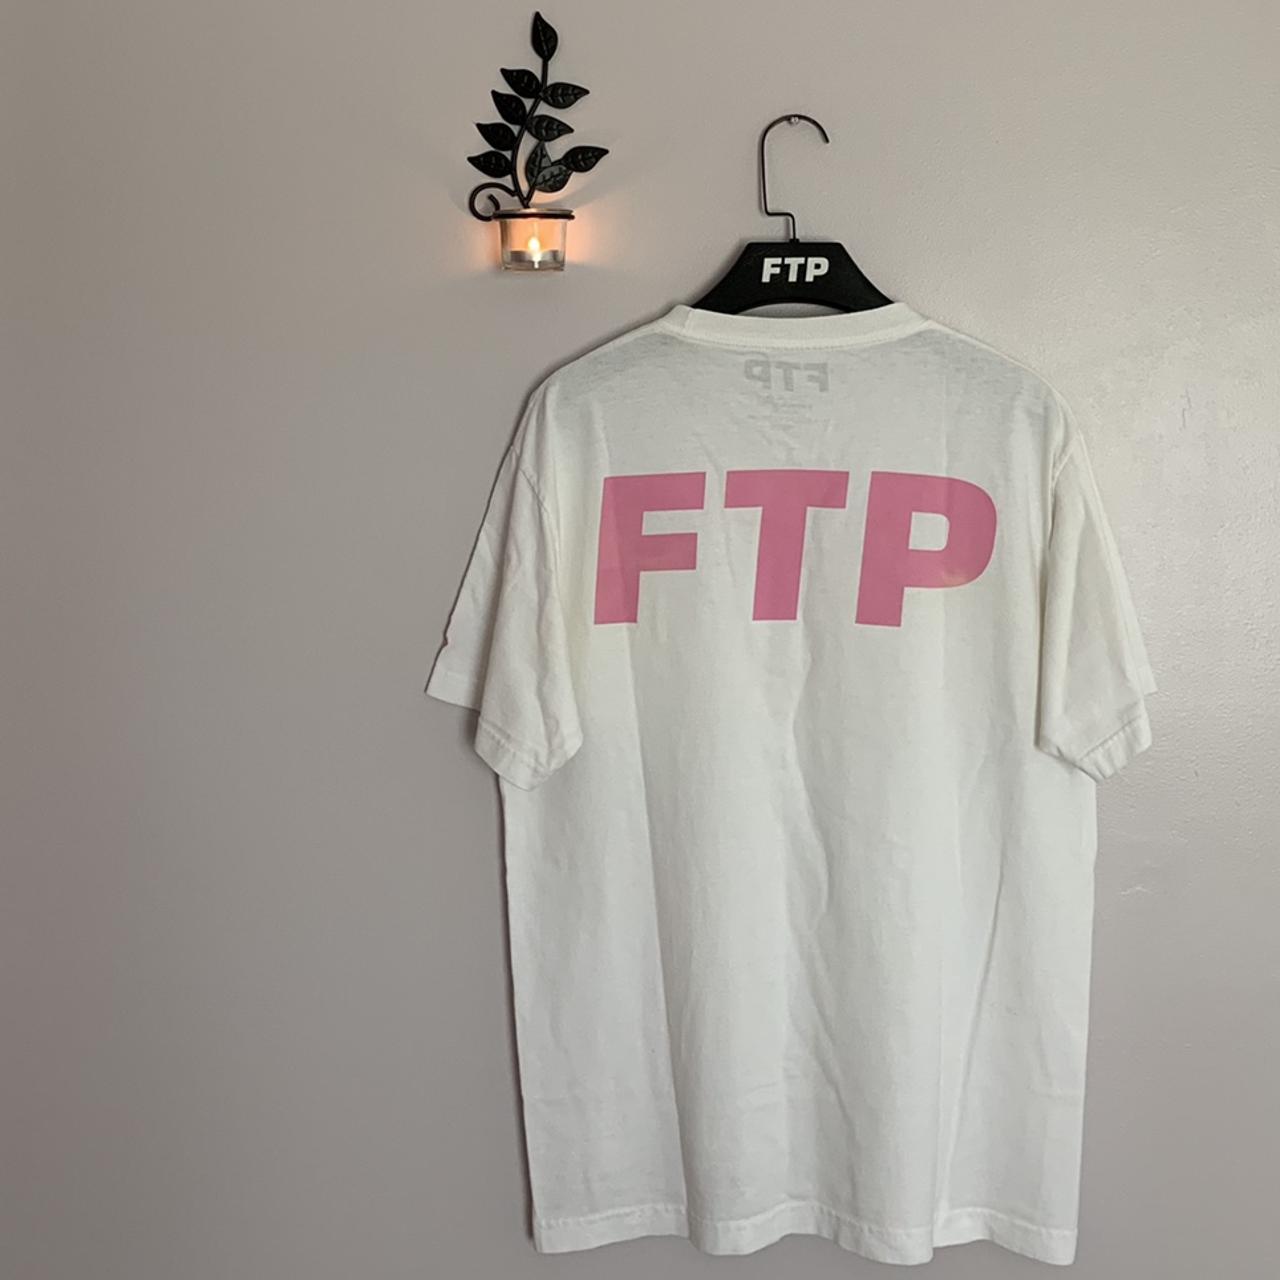 FTP Breast Cancer Tee, Released in 2017, Condition: